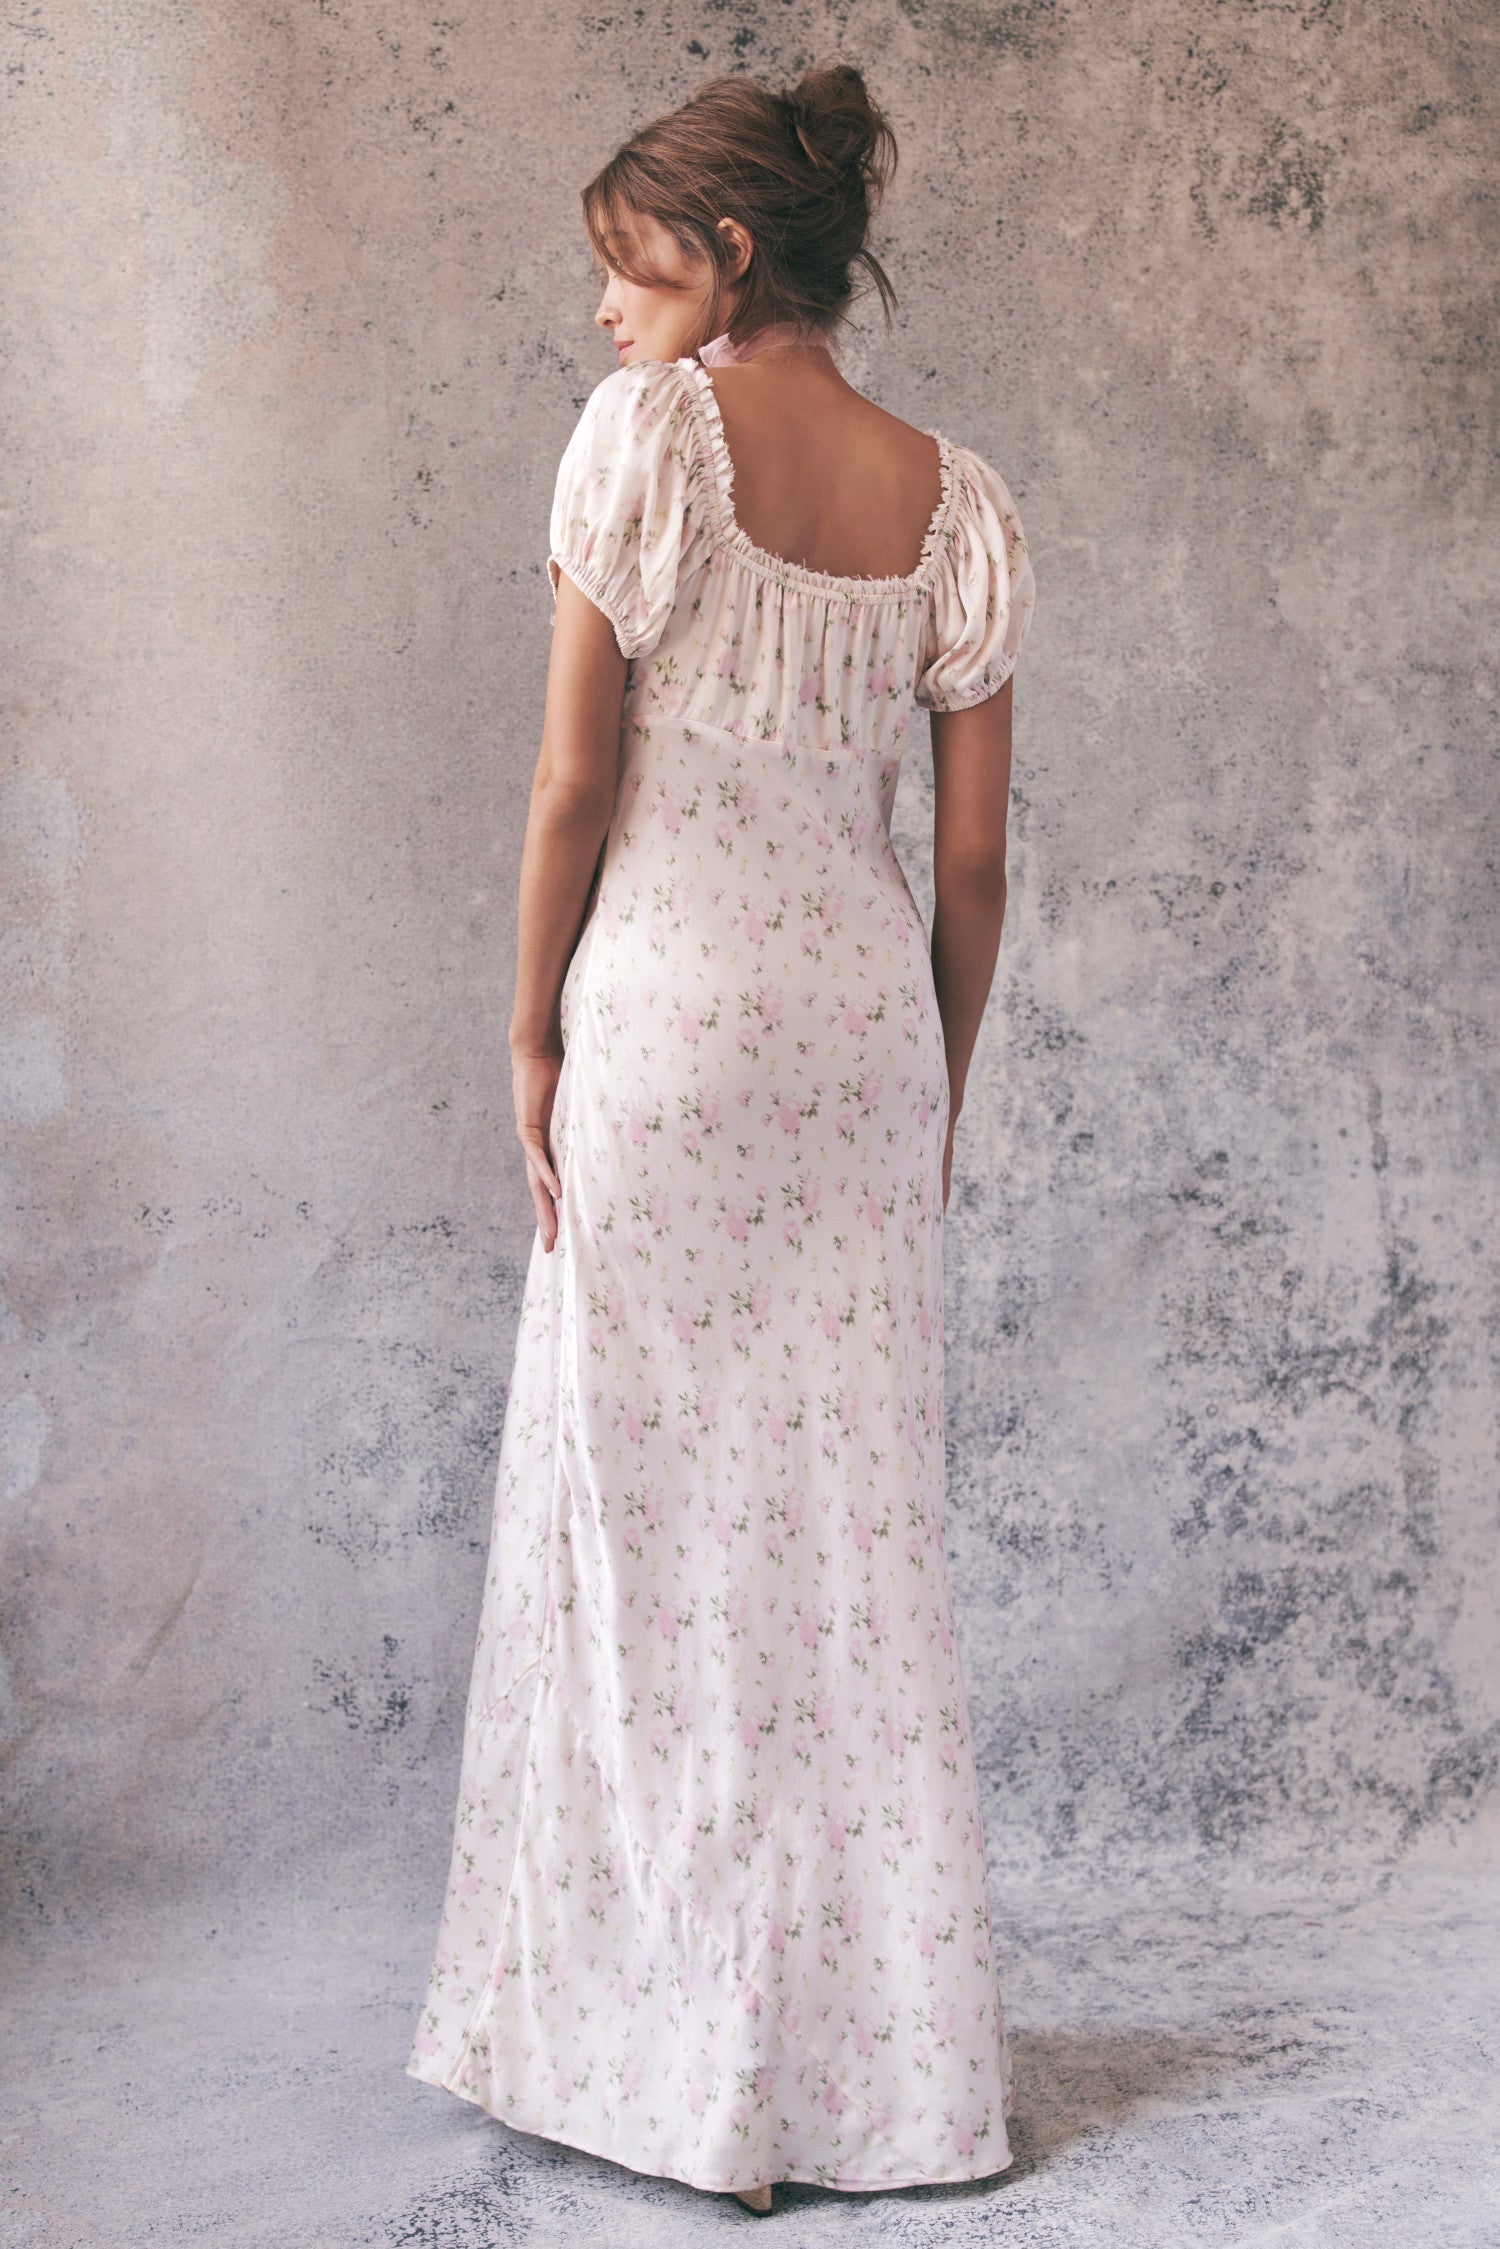 Back image of model wearing cream floral maxi dress